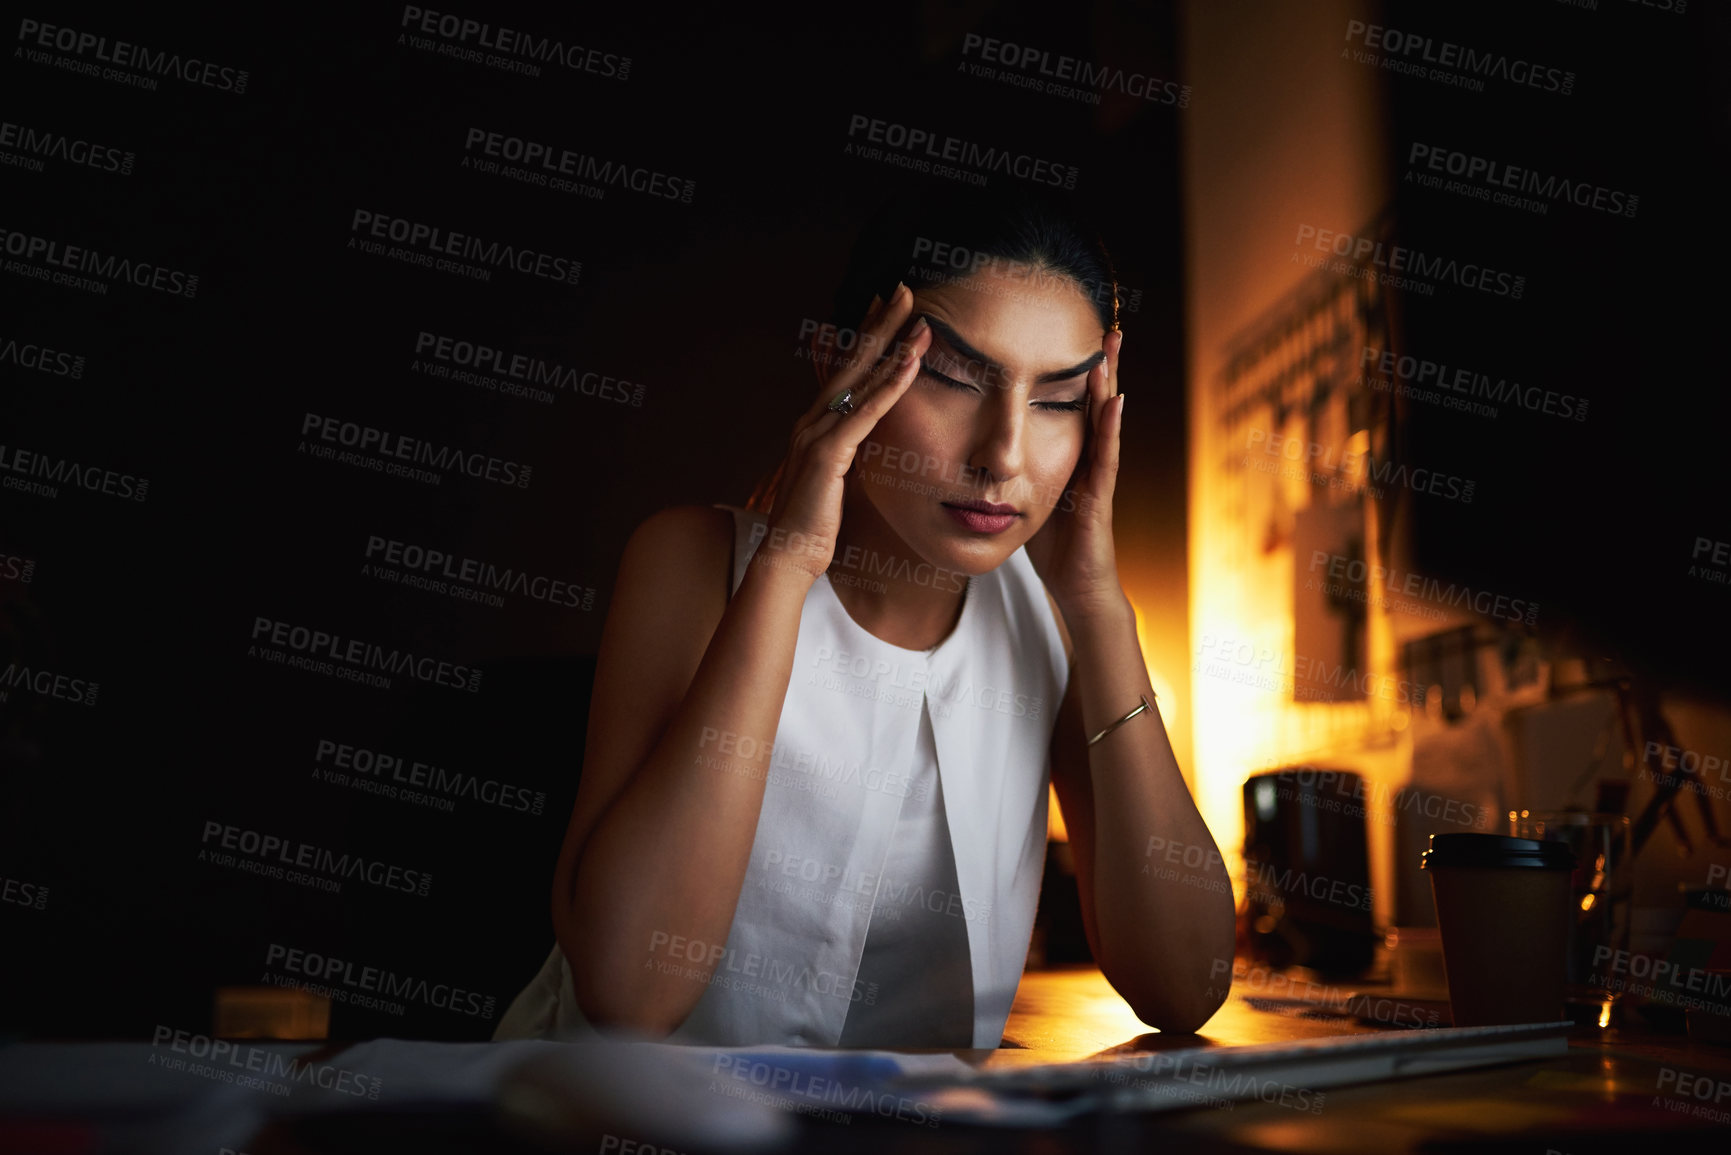 Buy stock photo Shot of a young businesswoman looking stressed out while working late in an office